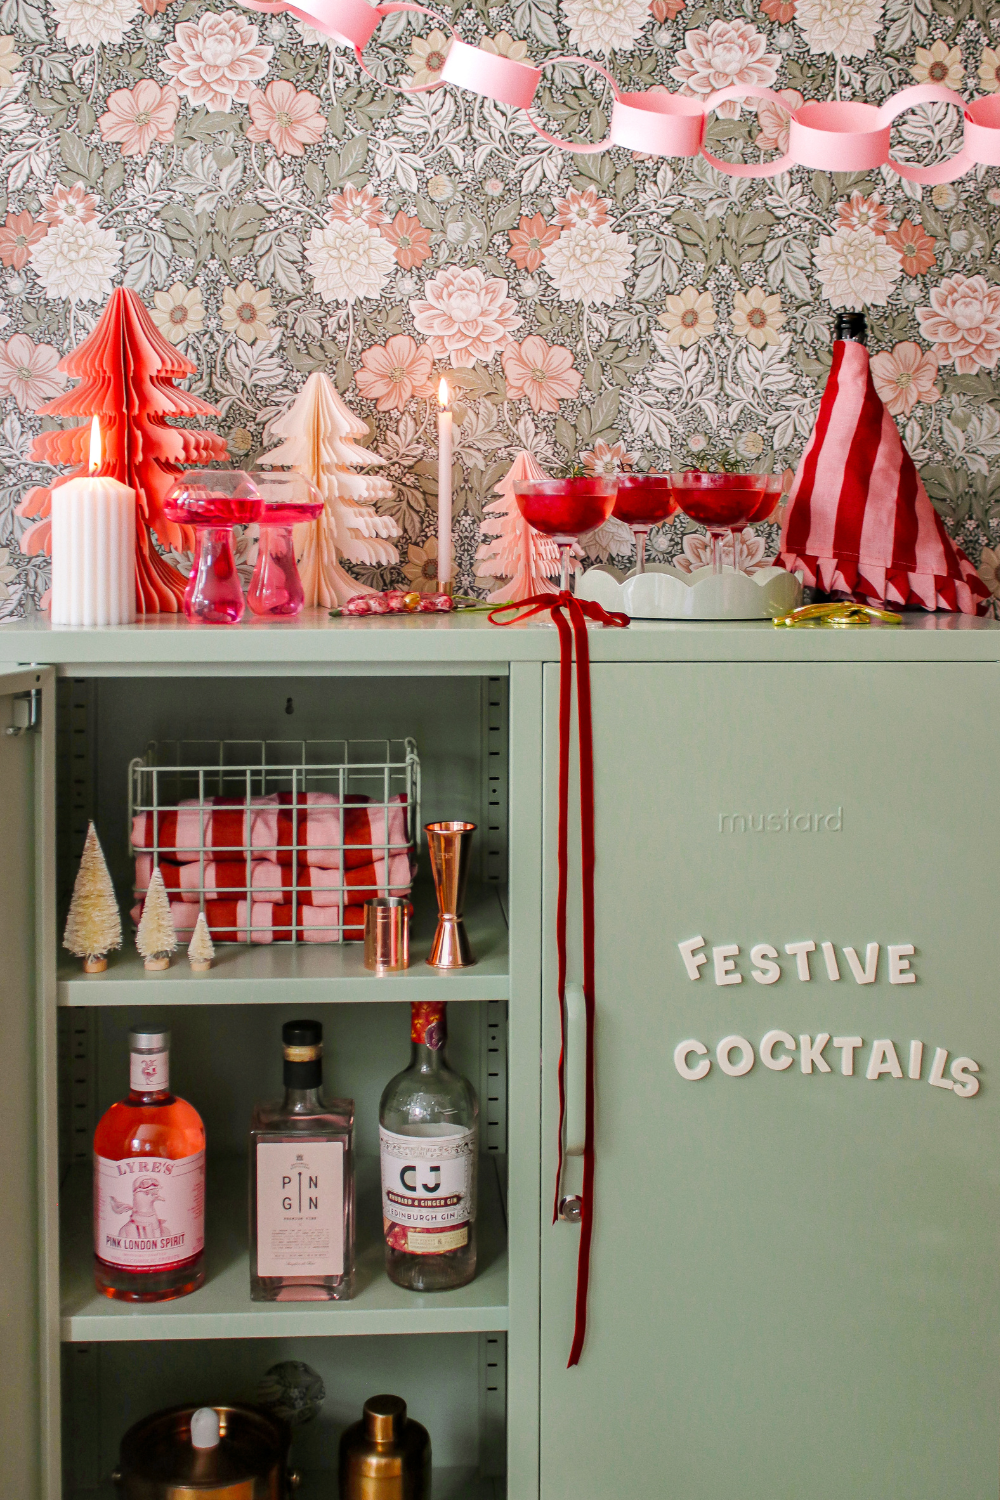 A Sage Midi has one door open. There is a cocktail shaker and bottles of spirits inside, while Wordbits on the other door read 'festive cocktails.'